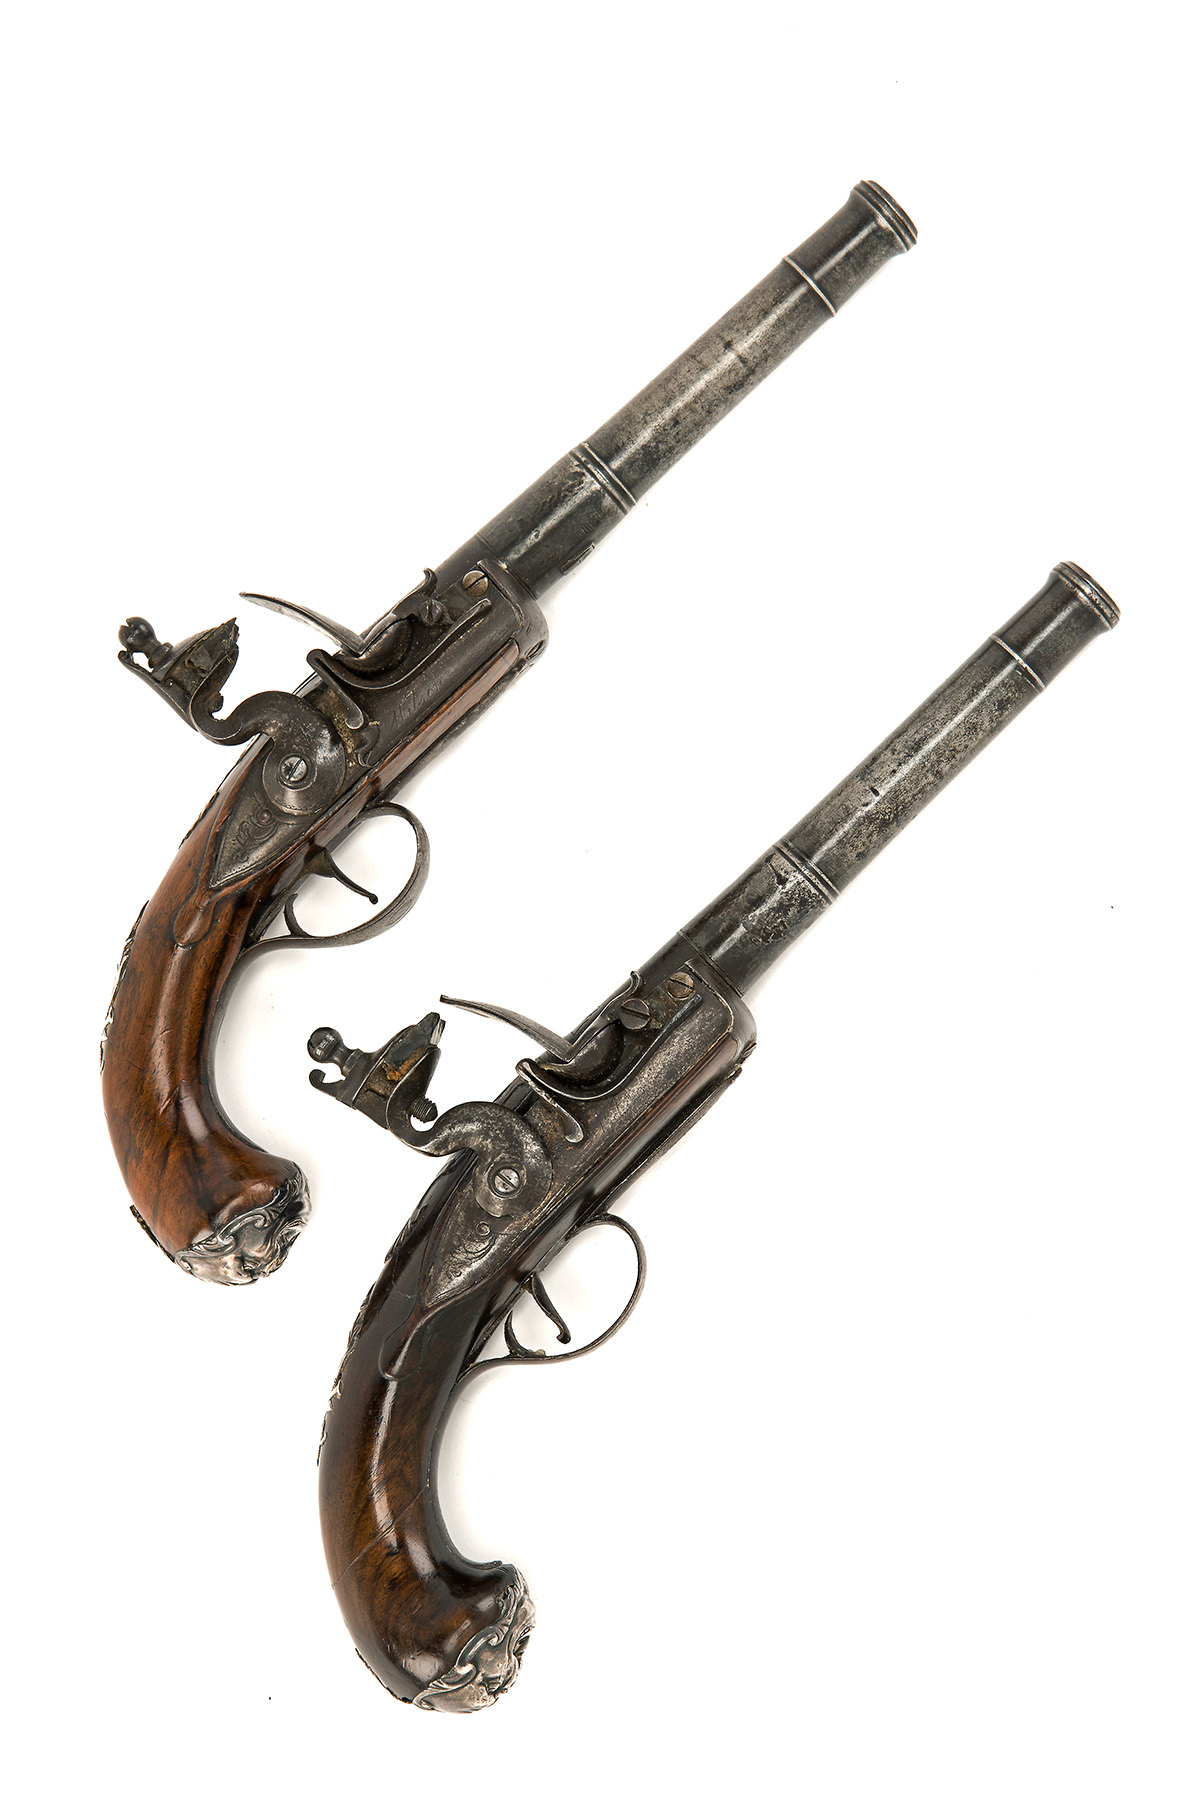 A PAIR OF 22-BORE FLINTLOCK 'FLAT-FRONT' QUEEN ANNE PISTOLS SIGNED WILSON, LONDON, no visible serial